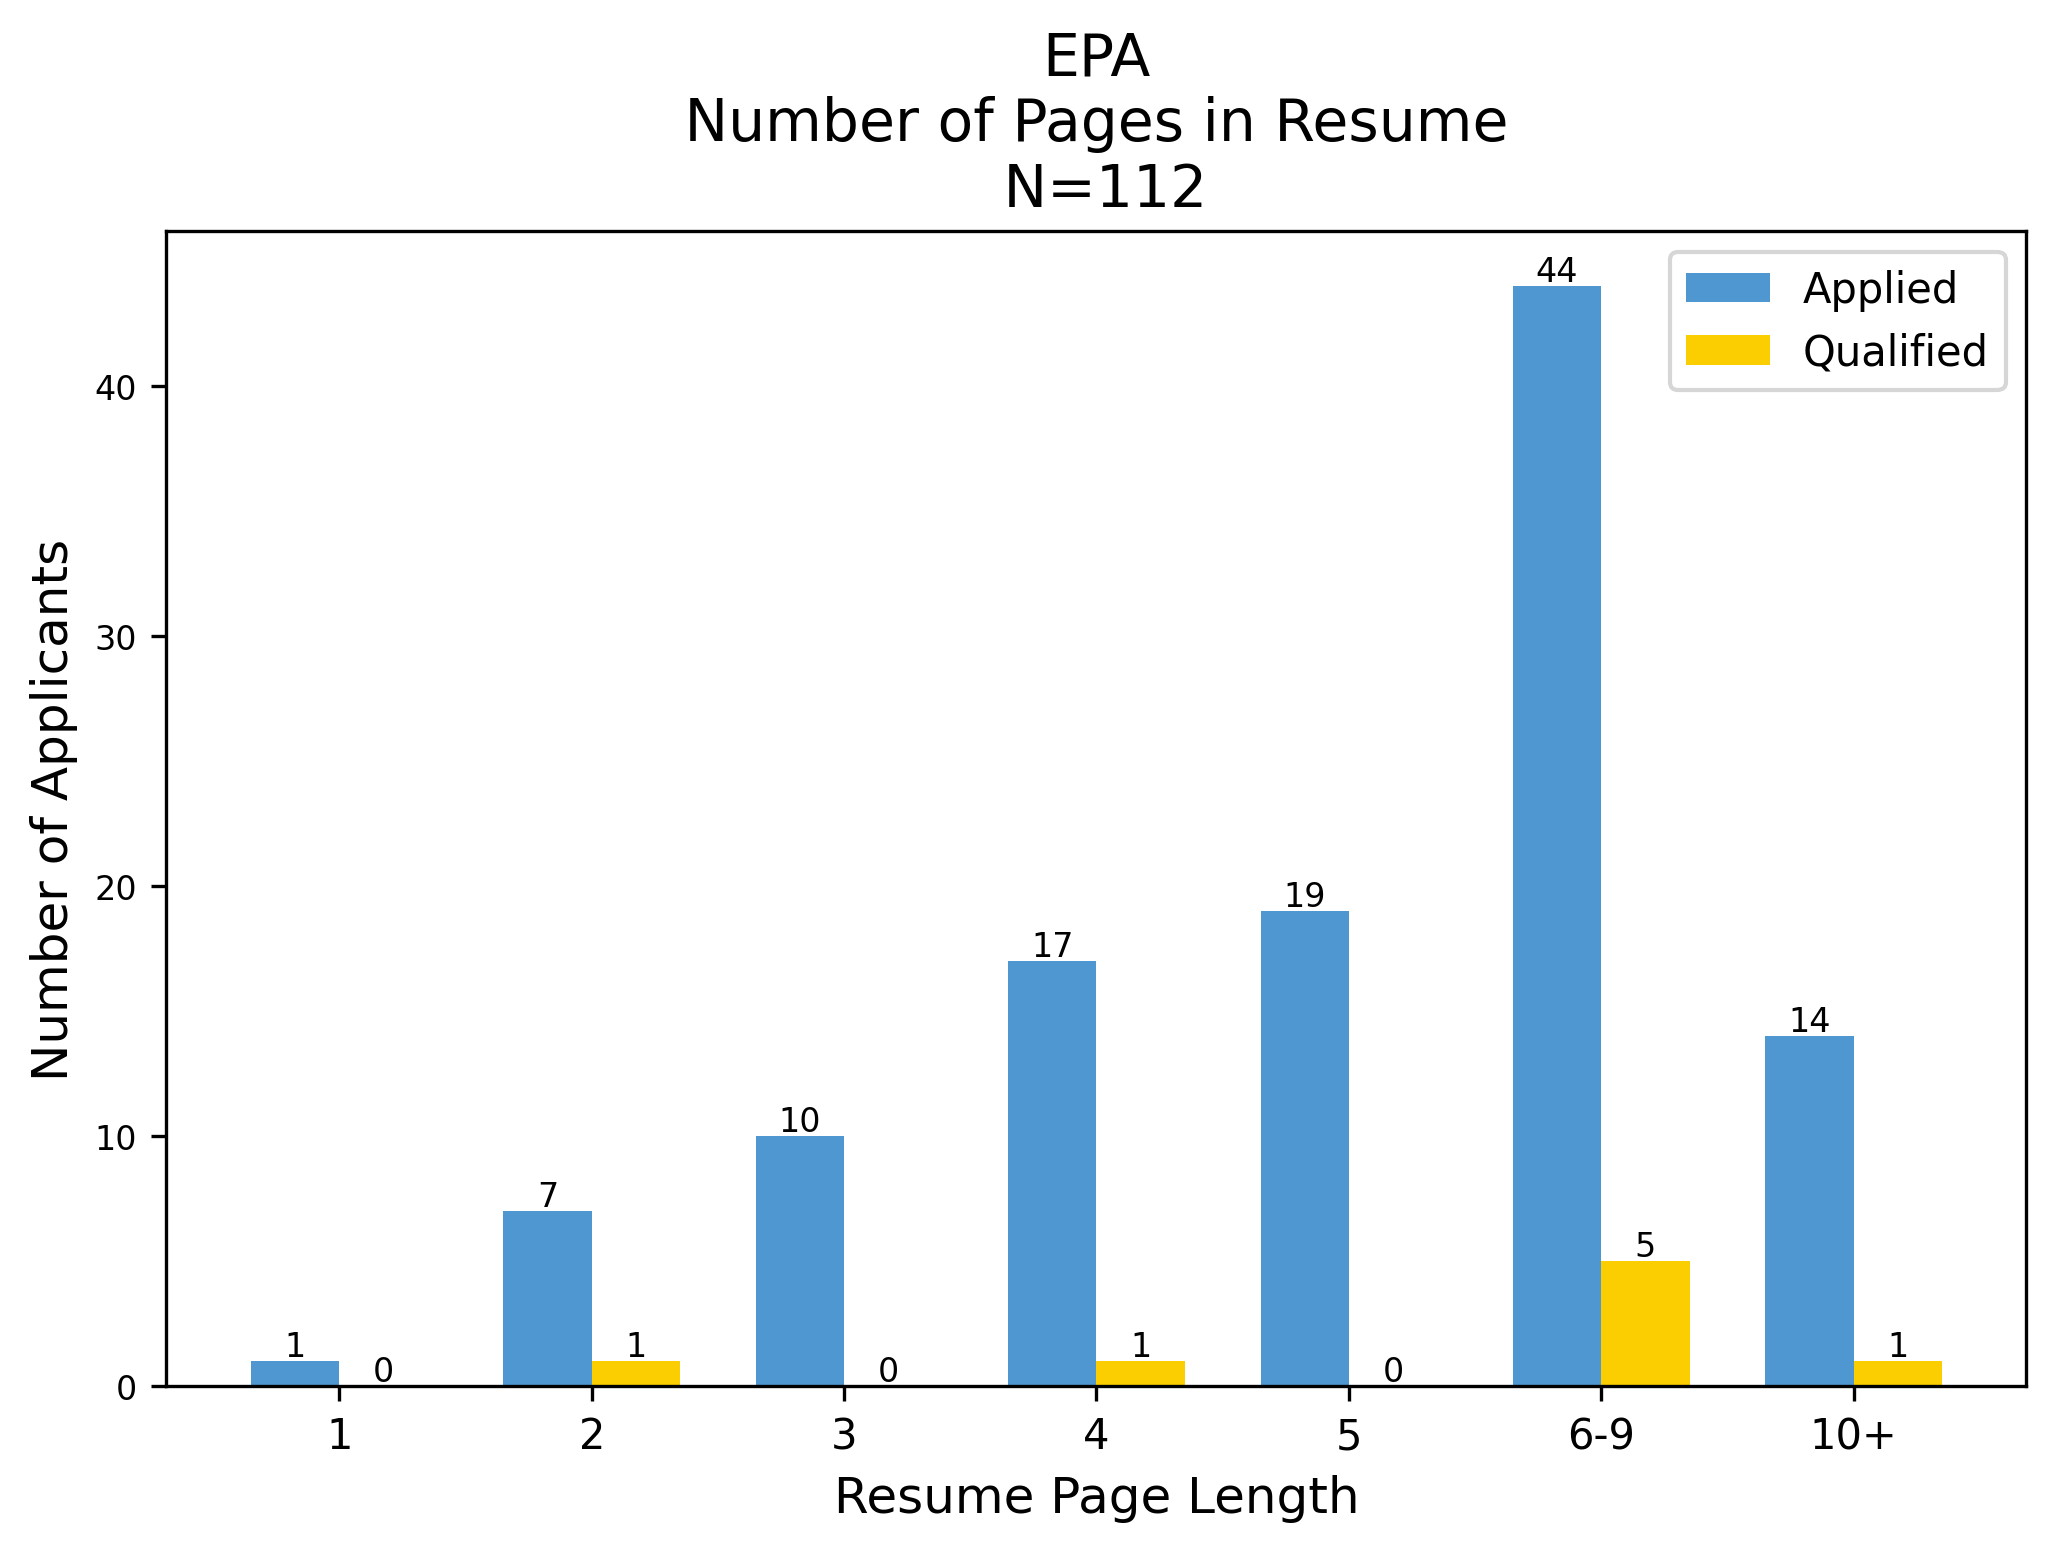 Resume length comparison for EPA round two